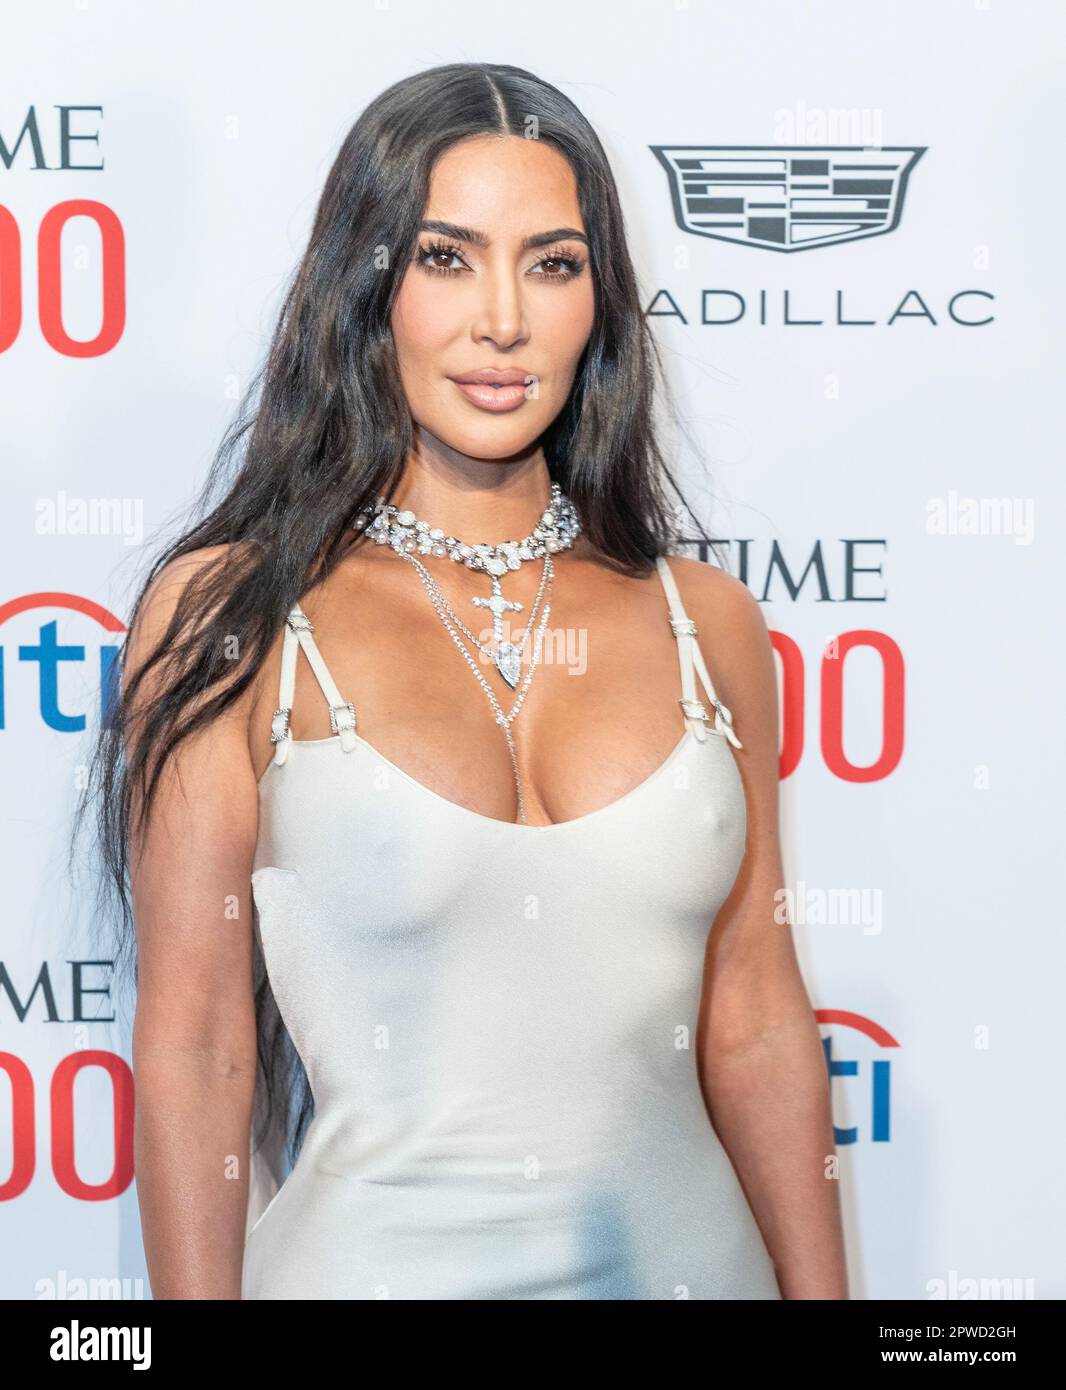 New York, United States. 26th Apr, 2023. Kim Kardashian wearing dress by John Galliano attends 2023 TIME100 Gala at Jazz at Lincoln Center (Photo by Lev Radin/Pacific Press) Credit: Pacific Press Media Production Corp./Alamy Live News Stock Photo